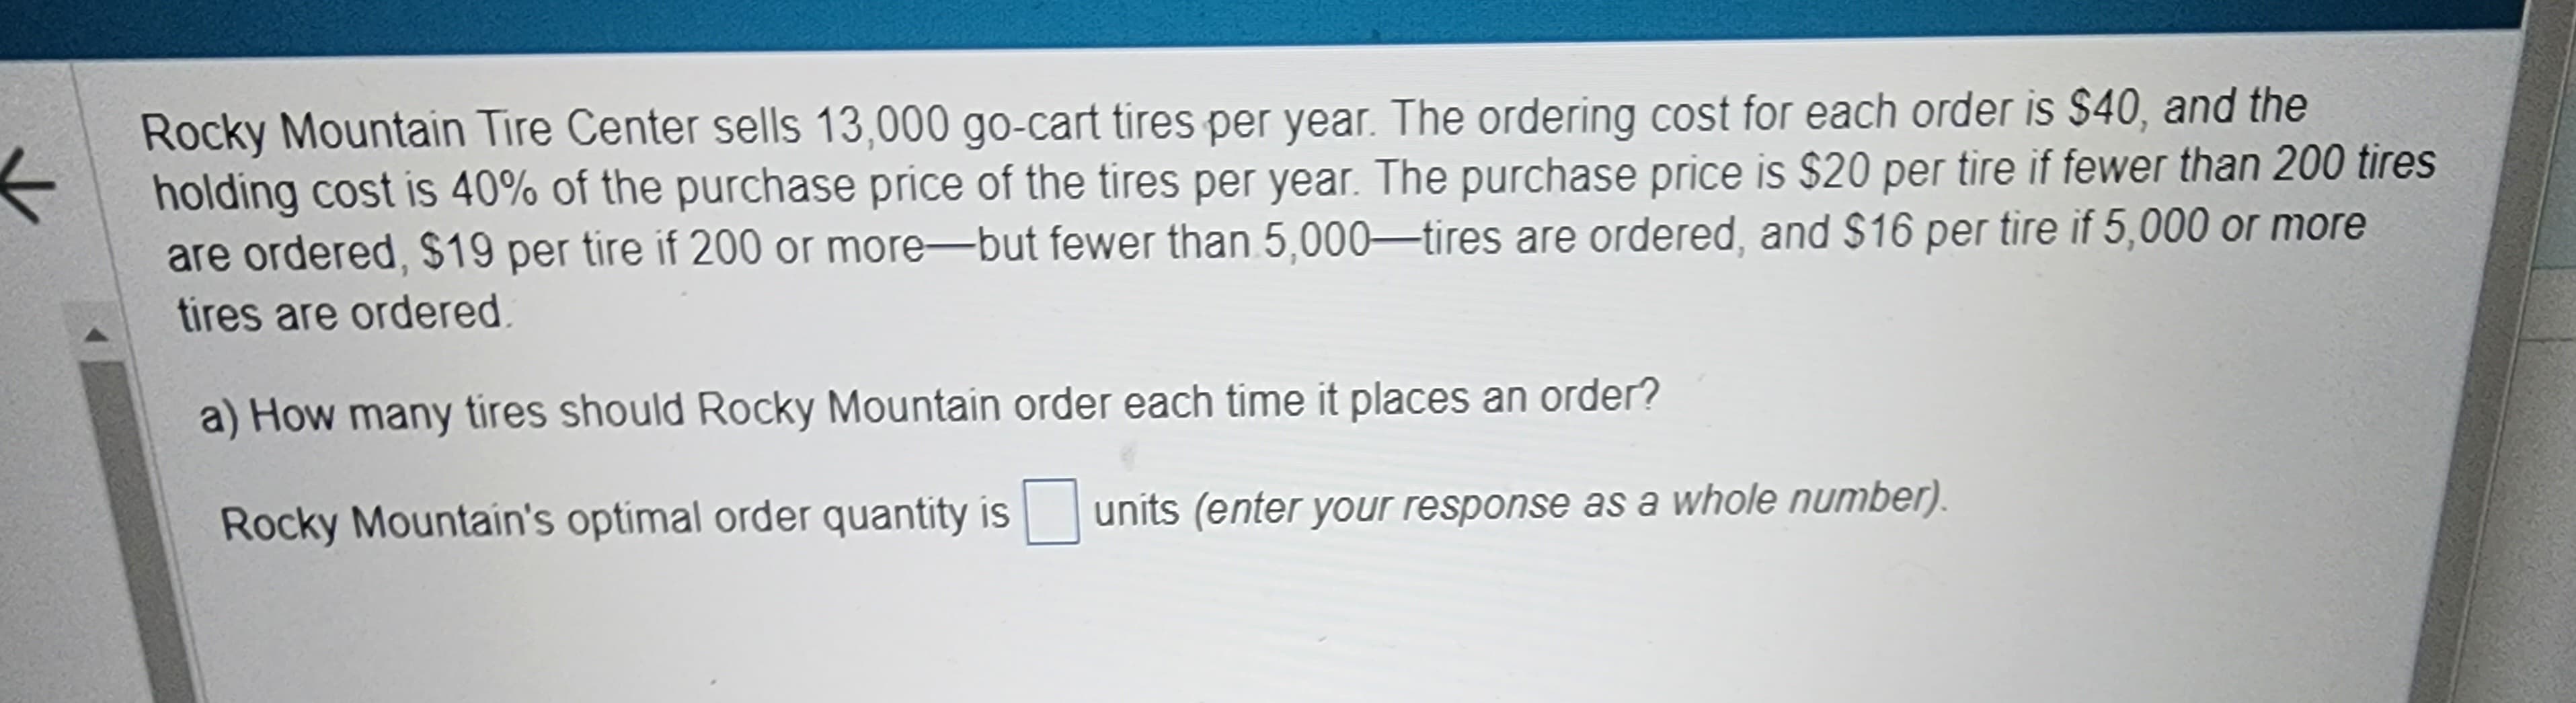 Rocky Mountain Tire Center sells 13,000 go-cart tires per year. The ordering cost for each order is $40, and the
holding cost is 40% of the purchase price of the tires per year. The purchase price is $20 per tire if fewer than 200 tires
are ordered, $19 per tire if 200 or more-but fewer than 5,000-tires are ordered, and $16 per tire if 5,000 or more
tires are ordered.
a) How many tires should Rocky Mountain order each time it places an order?
Rocky Mountain's optimal order quantity is units (enter your response as a whole number).